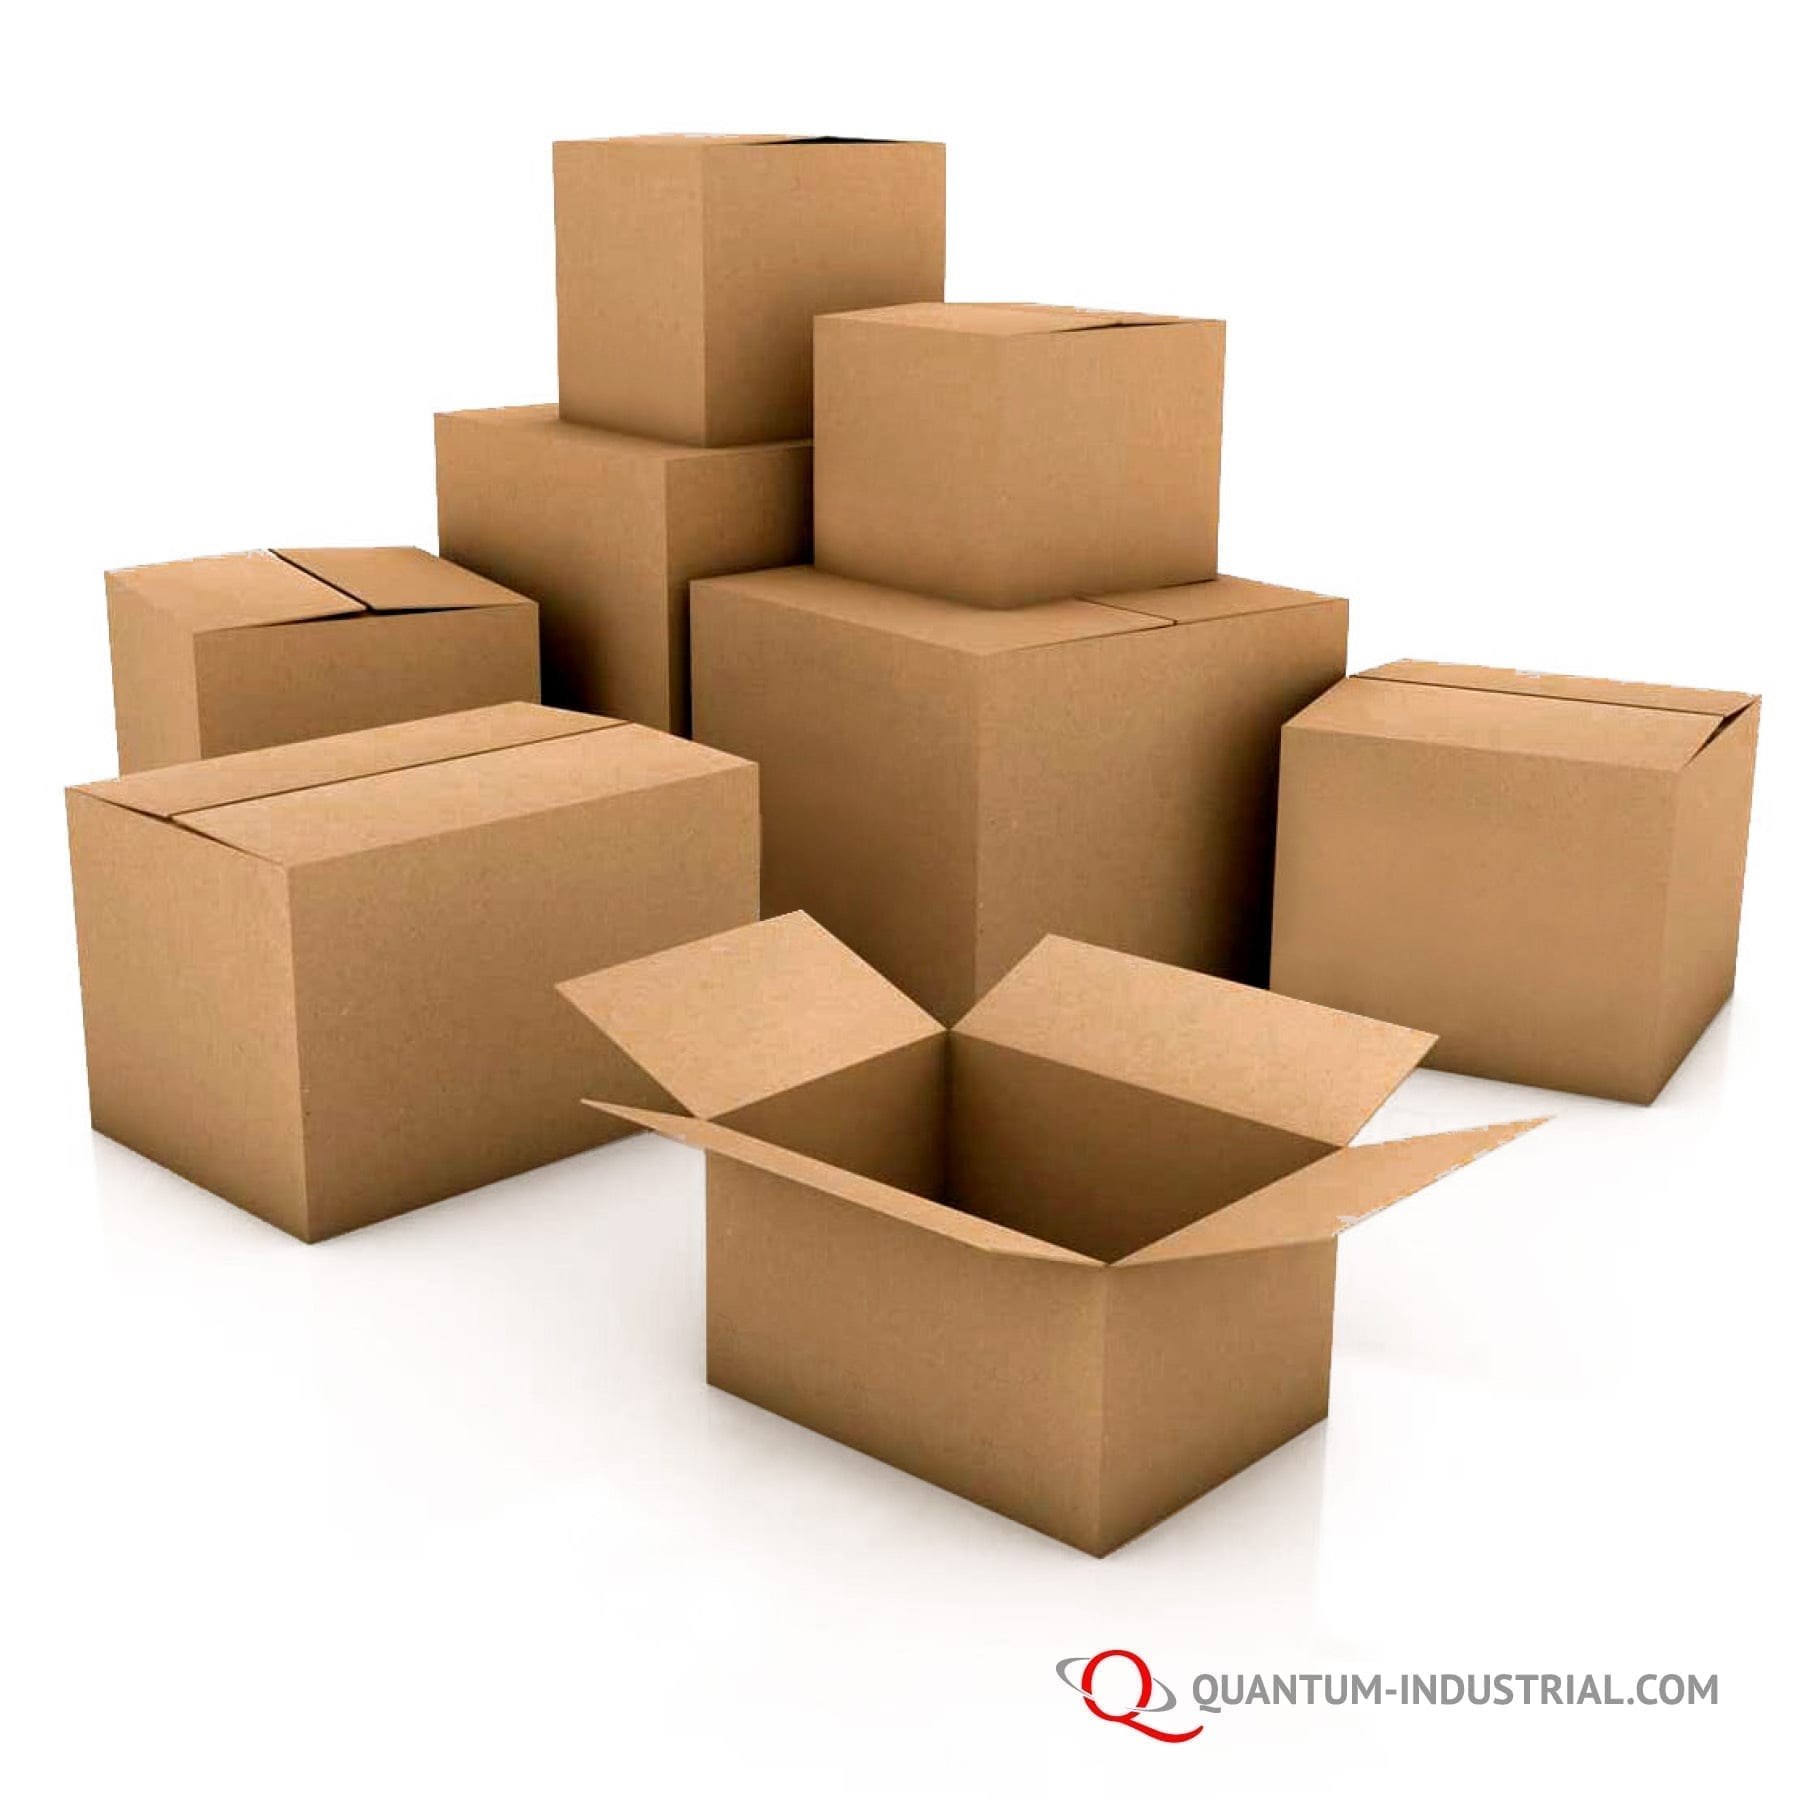 30x14x7 Moving Box Packaging Boxes Cardboard Corrugated Packing Shipping 